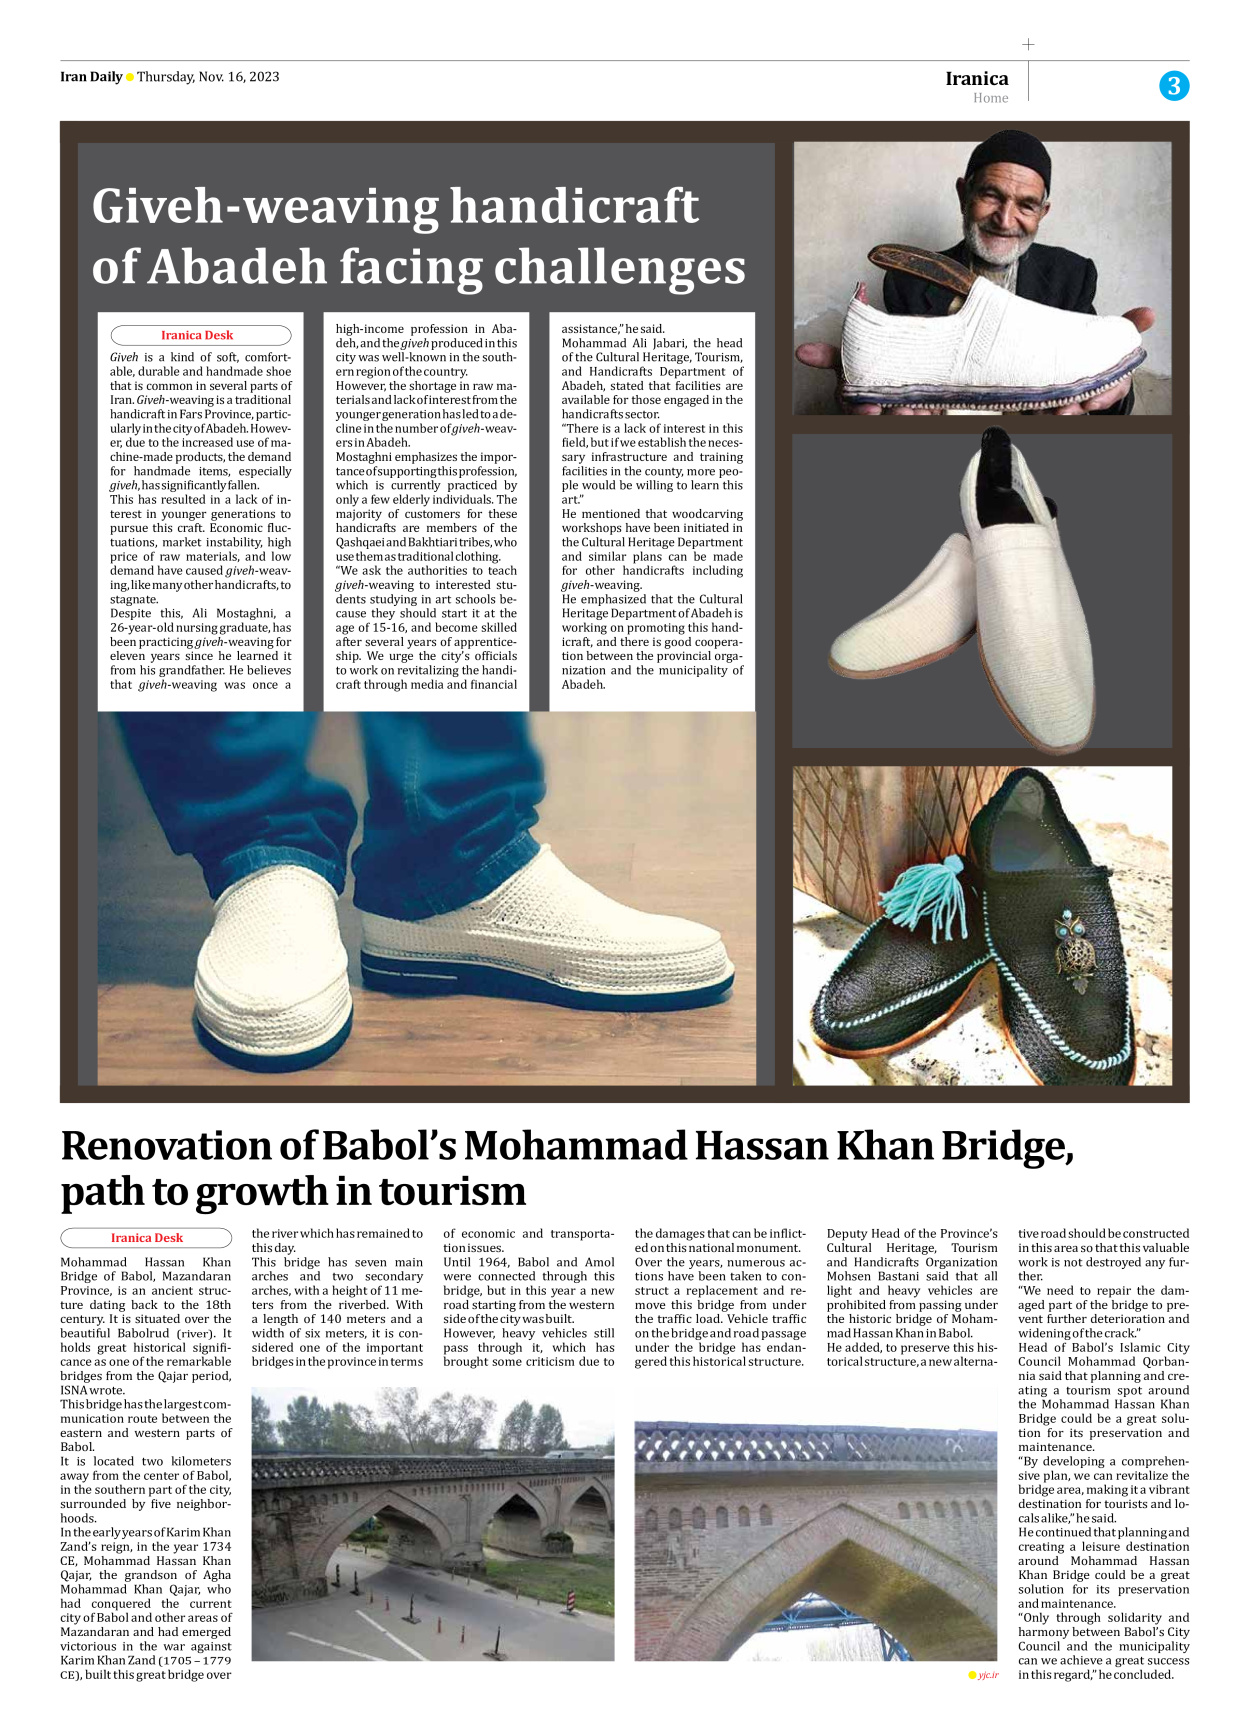 Iran Daily - Number Seven Thousand Four Hundred and Thirty Six - 16 November 2023 - Page 3